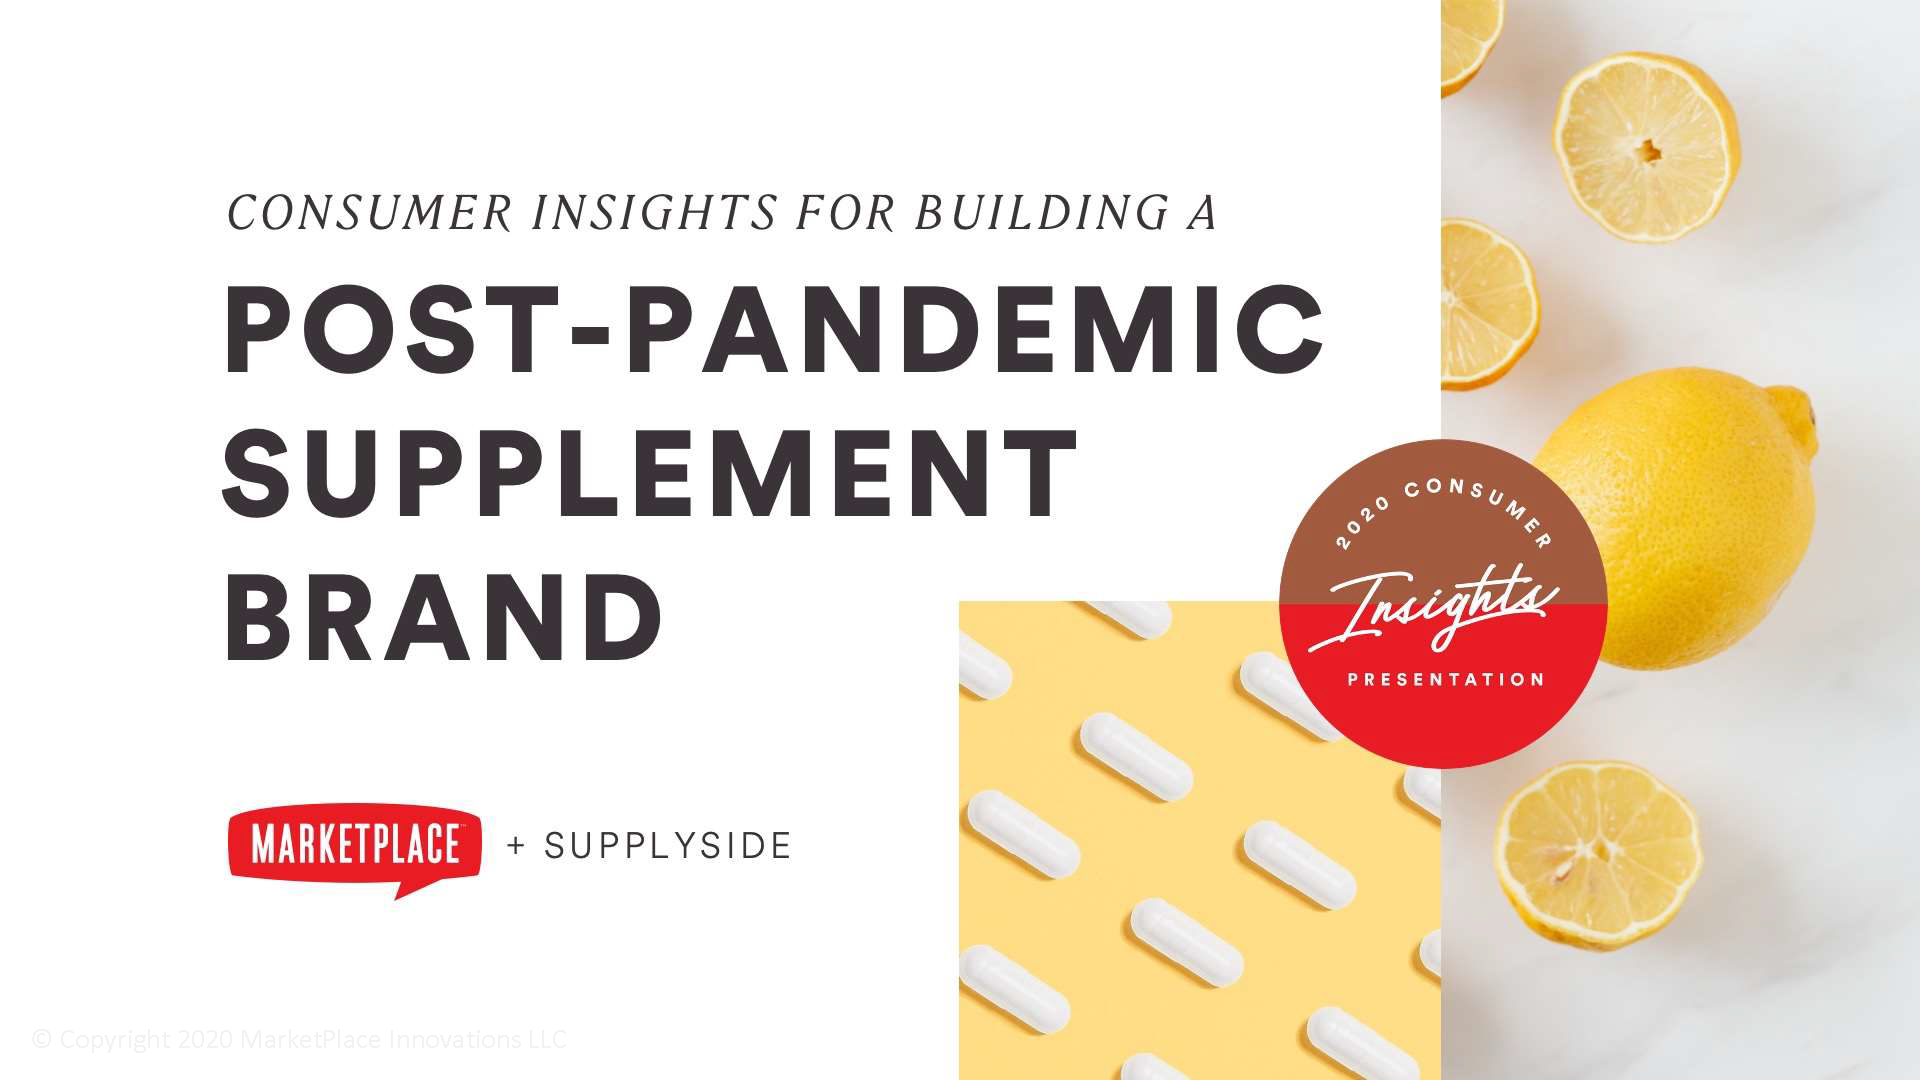 consumer insights for building a post-pandemic, after covid supplement brand